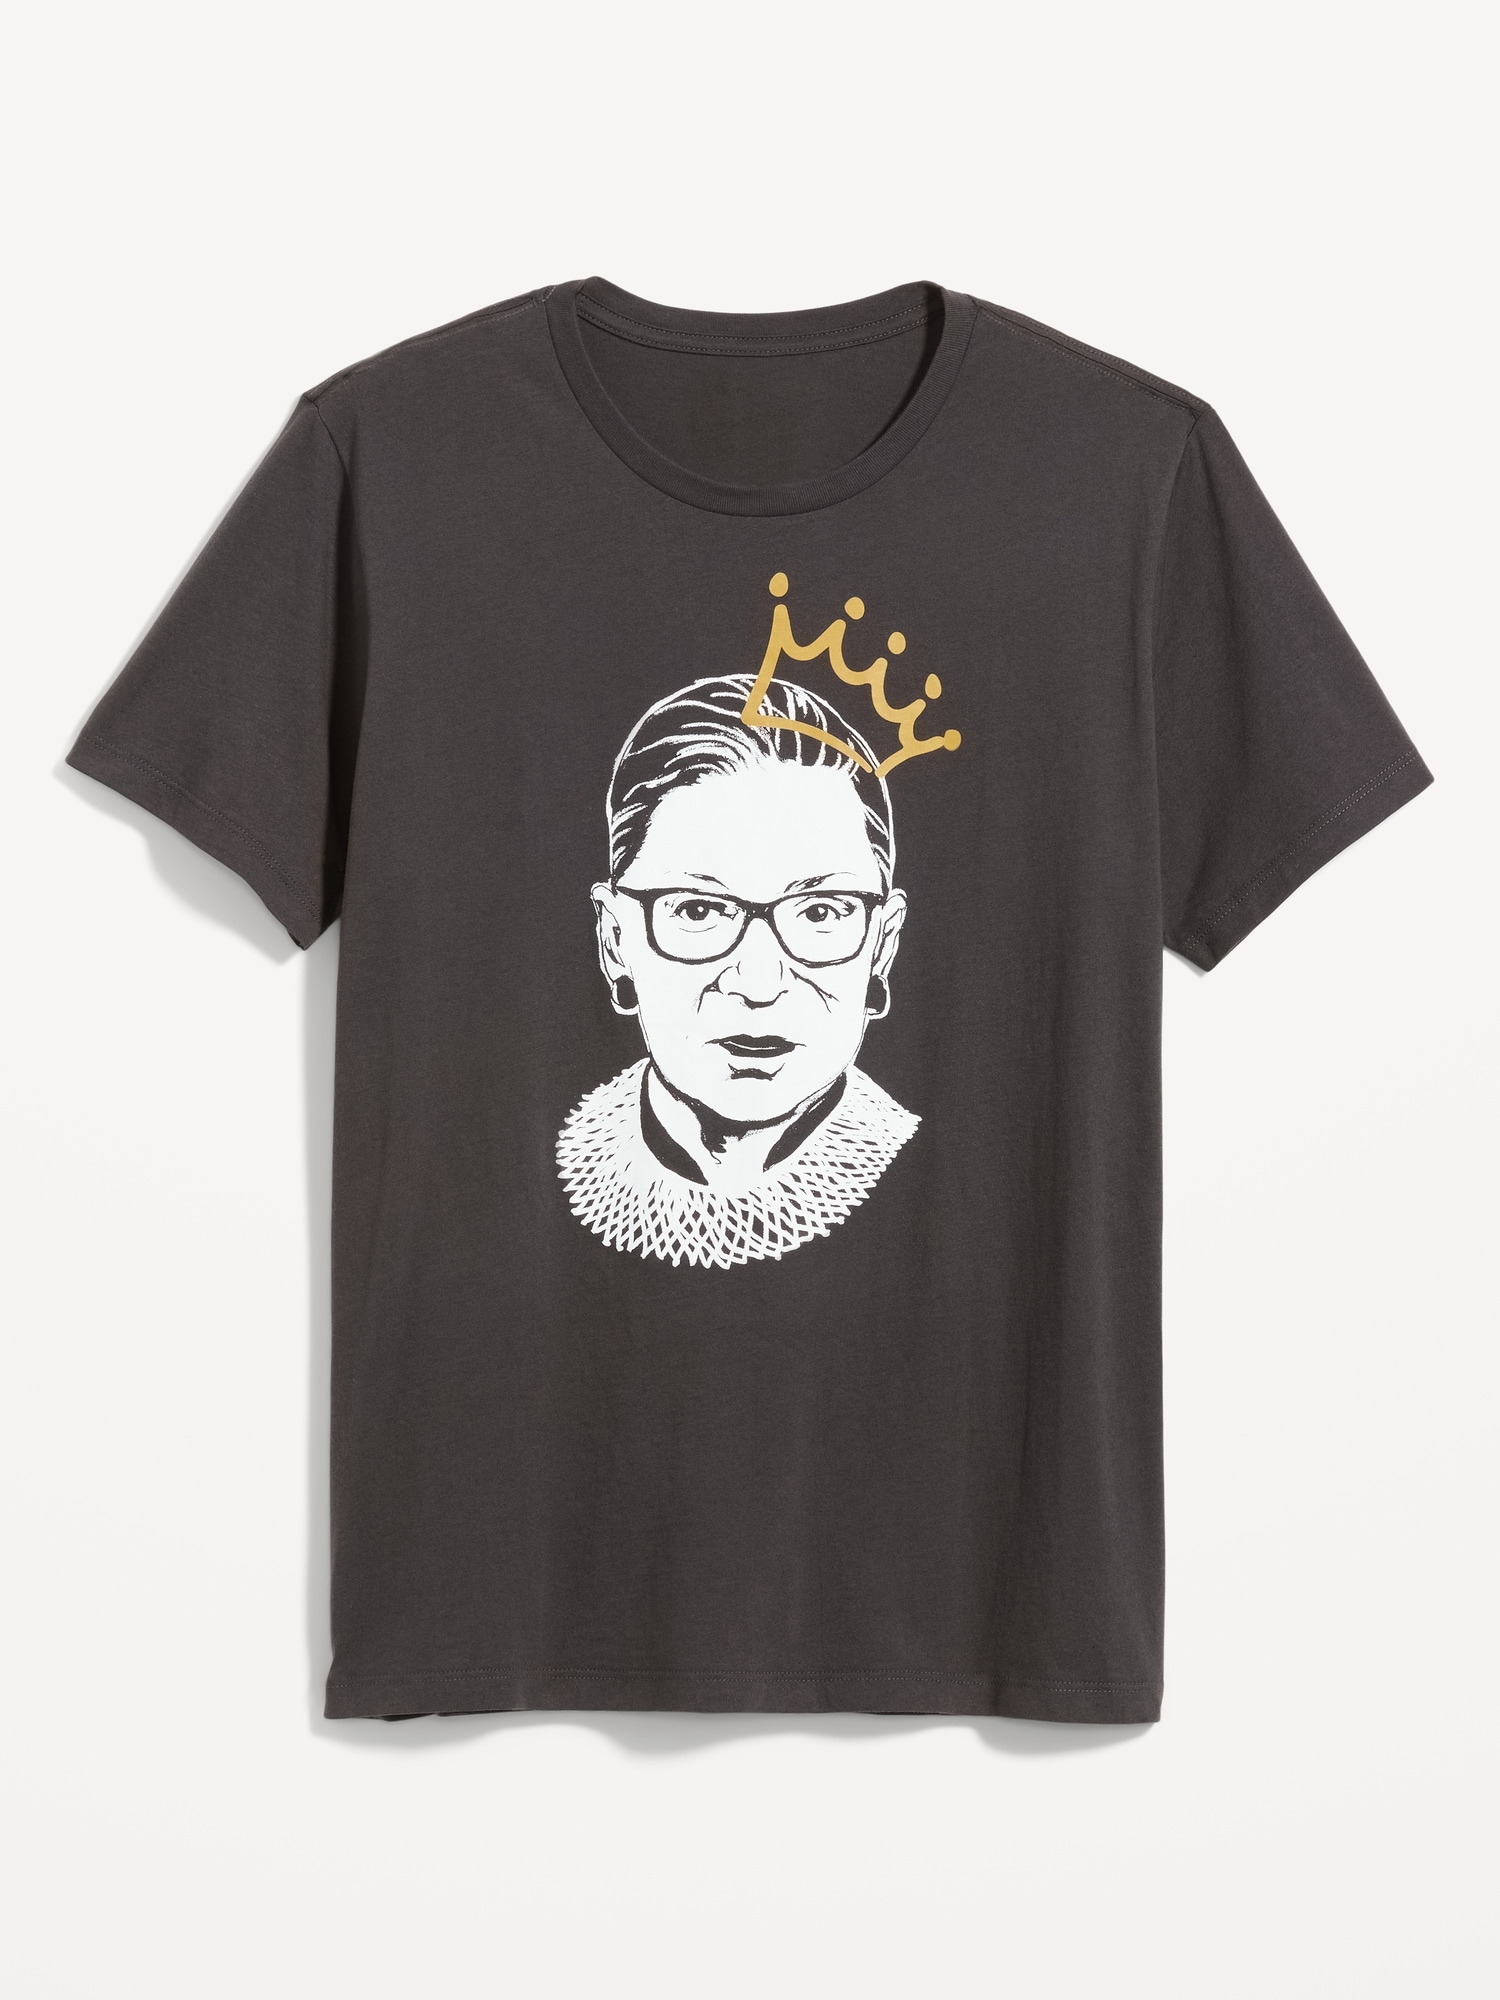 Old Navy Matching "Ruth Bader Ginsburg" Gender-Neutral T-Shirt for Adults black. 1